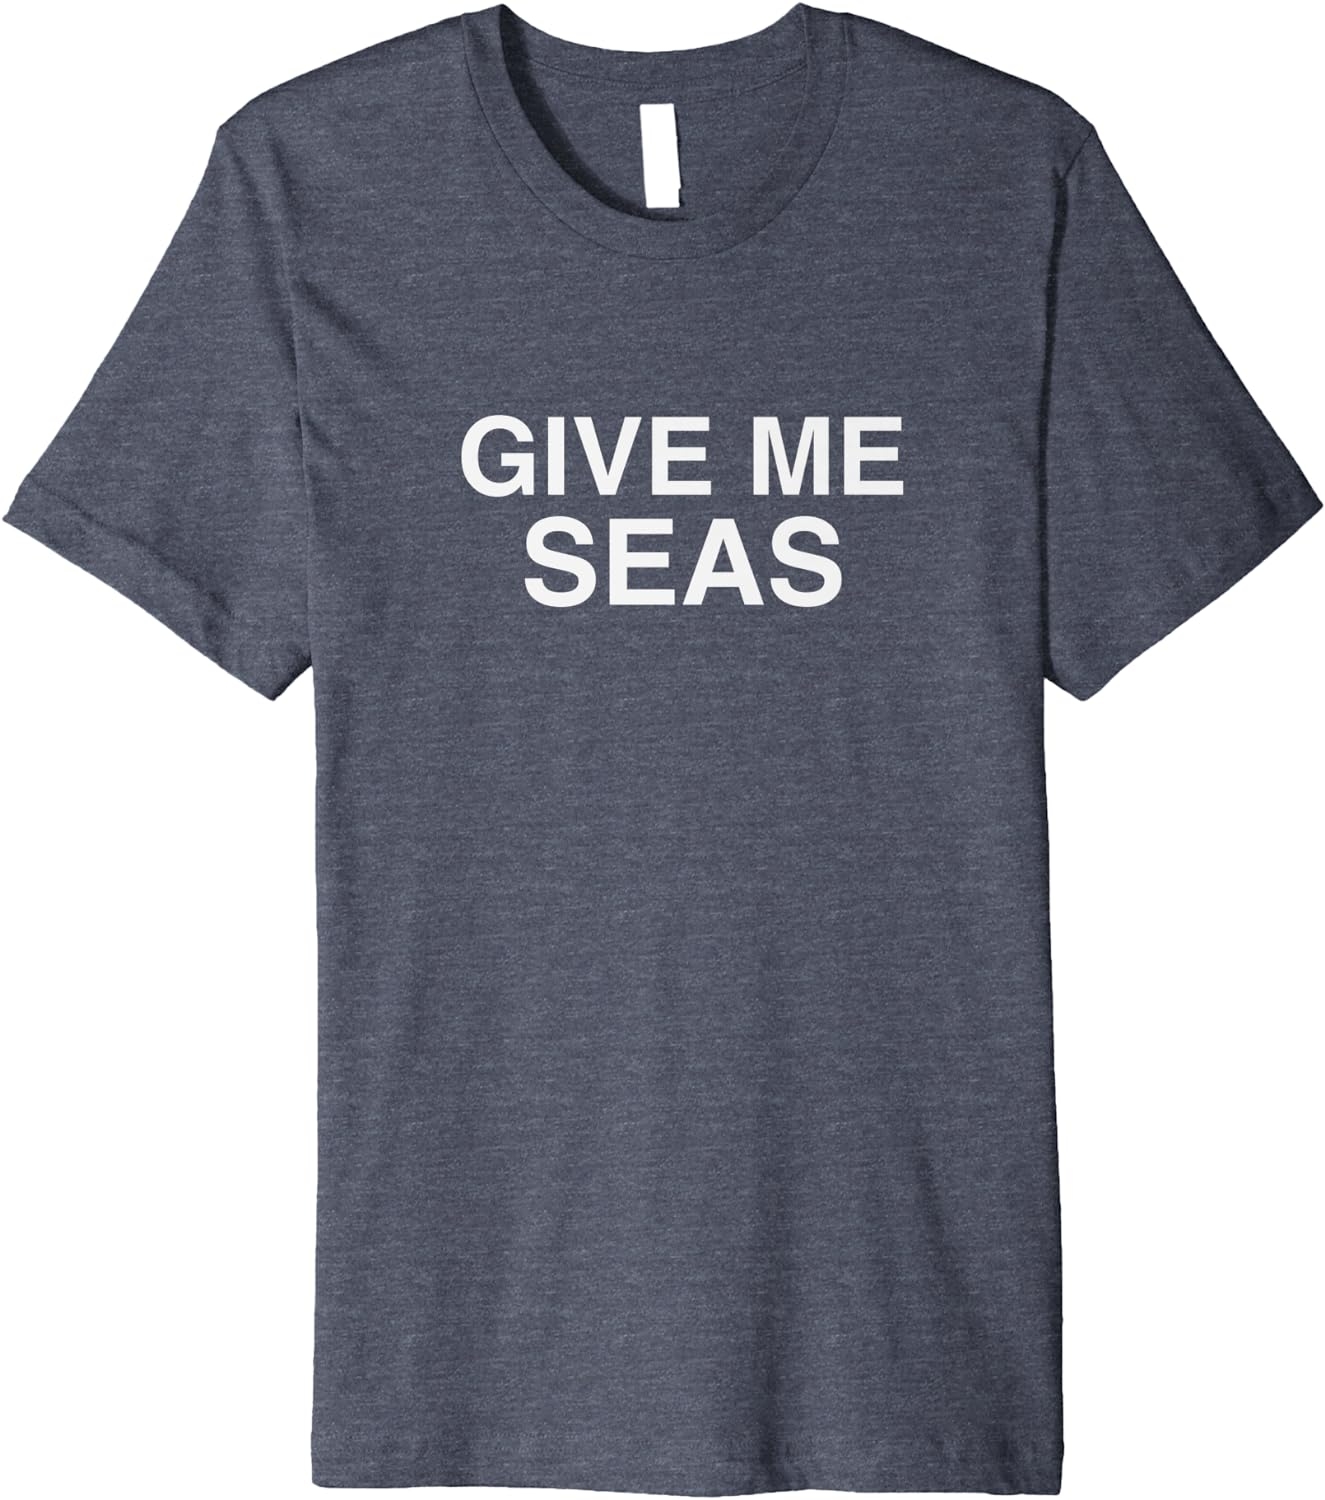 Give me seas Premium T-Shirt   price checker   price checker Description Gallery Reviews Variations Additional details Product